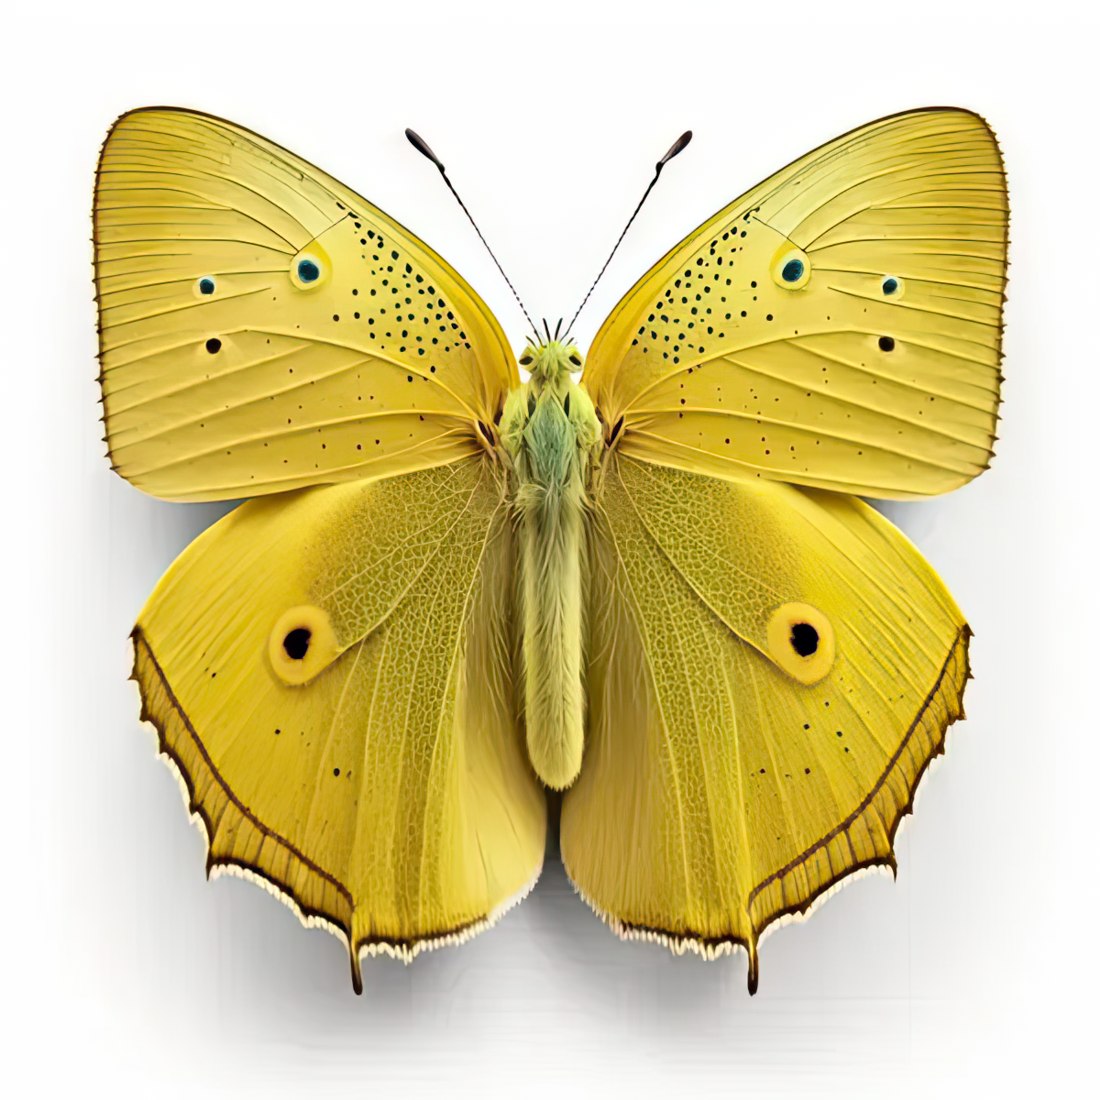 Yellow butterfly with green spots on its wings.